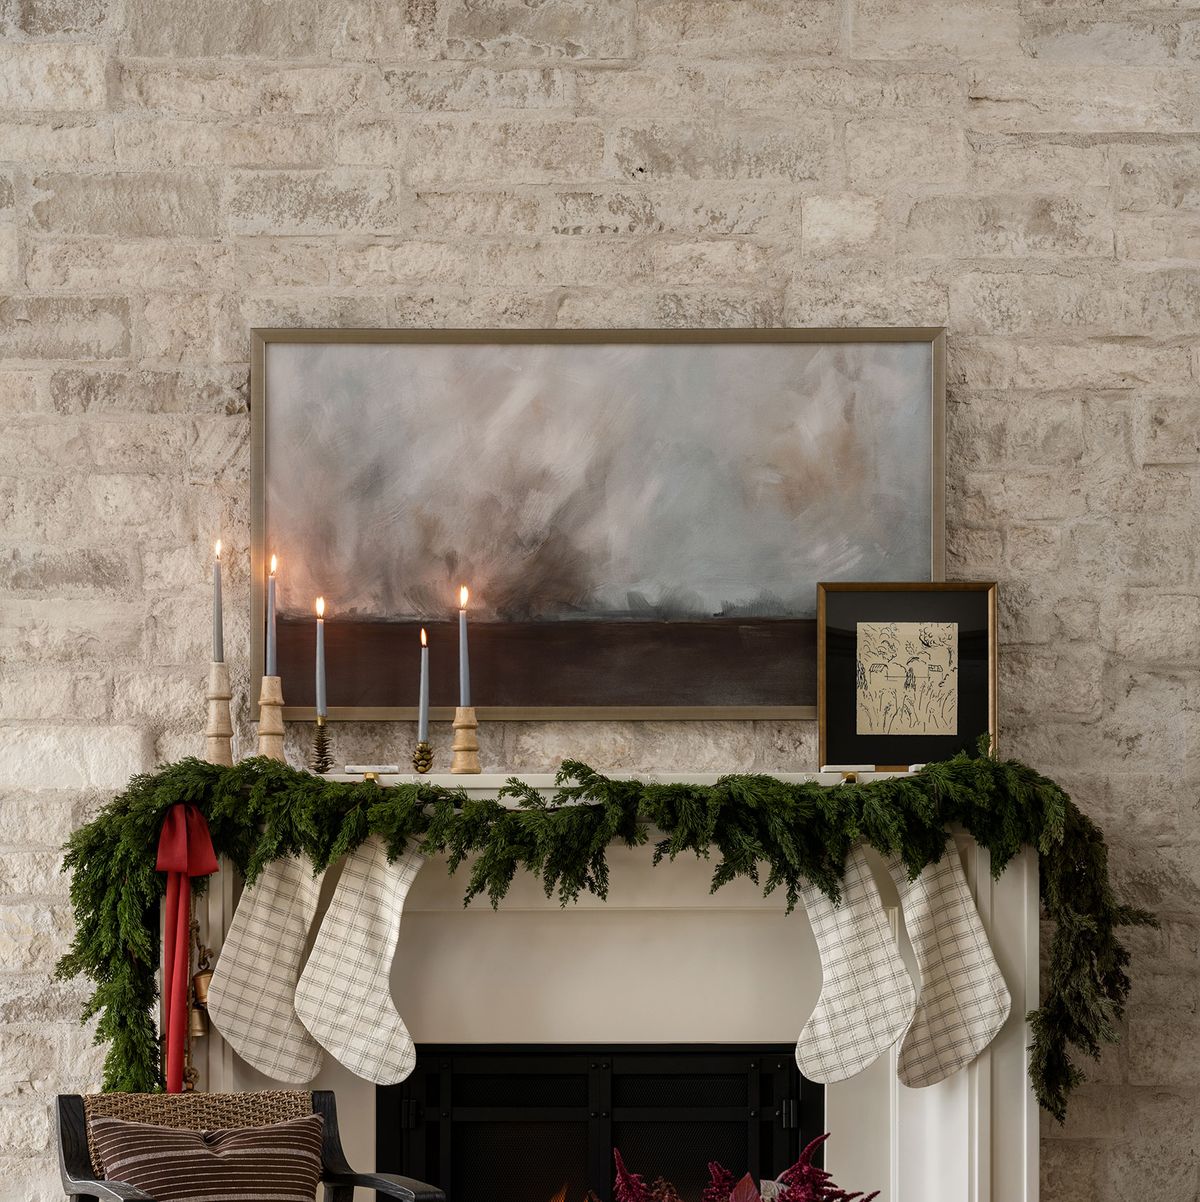 Christmas Mantel Ideas That Will Be the True Star of the Show